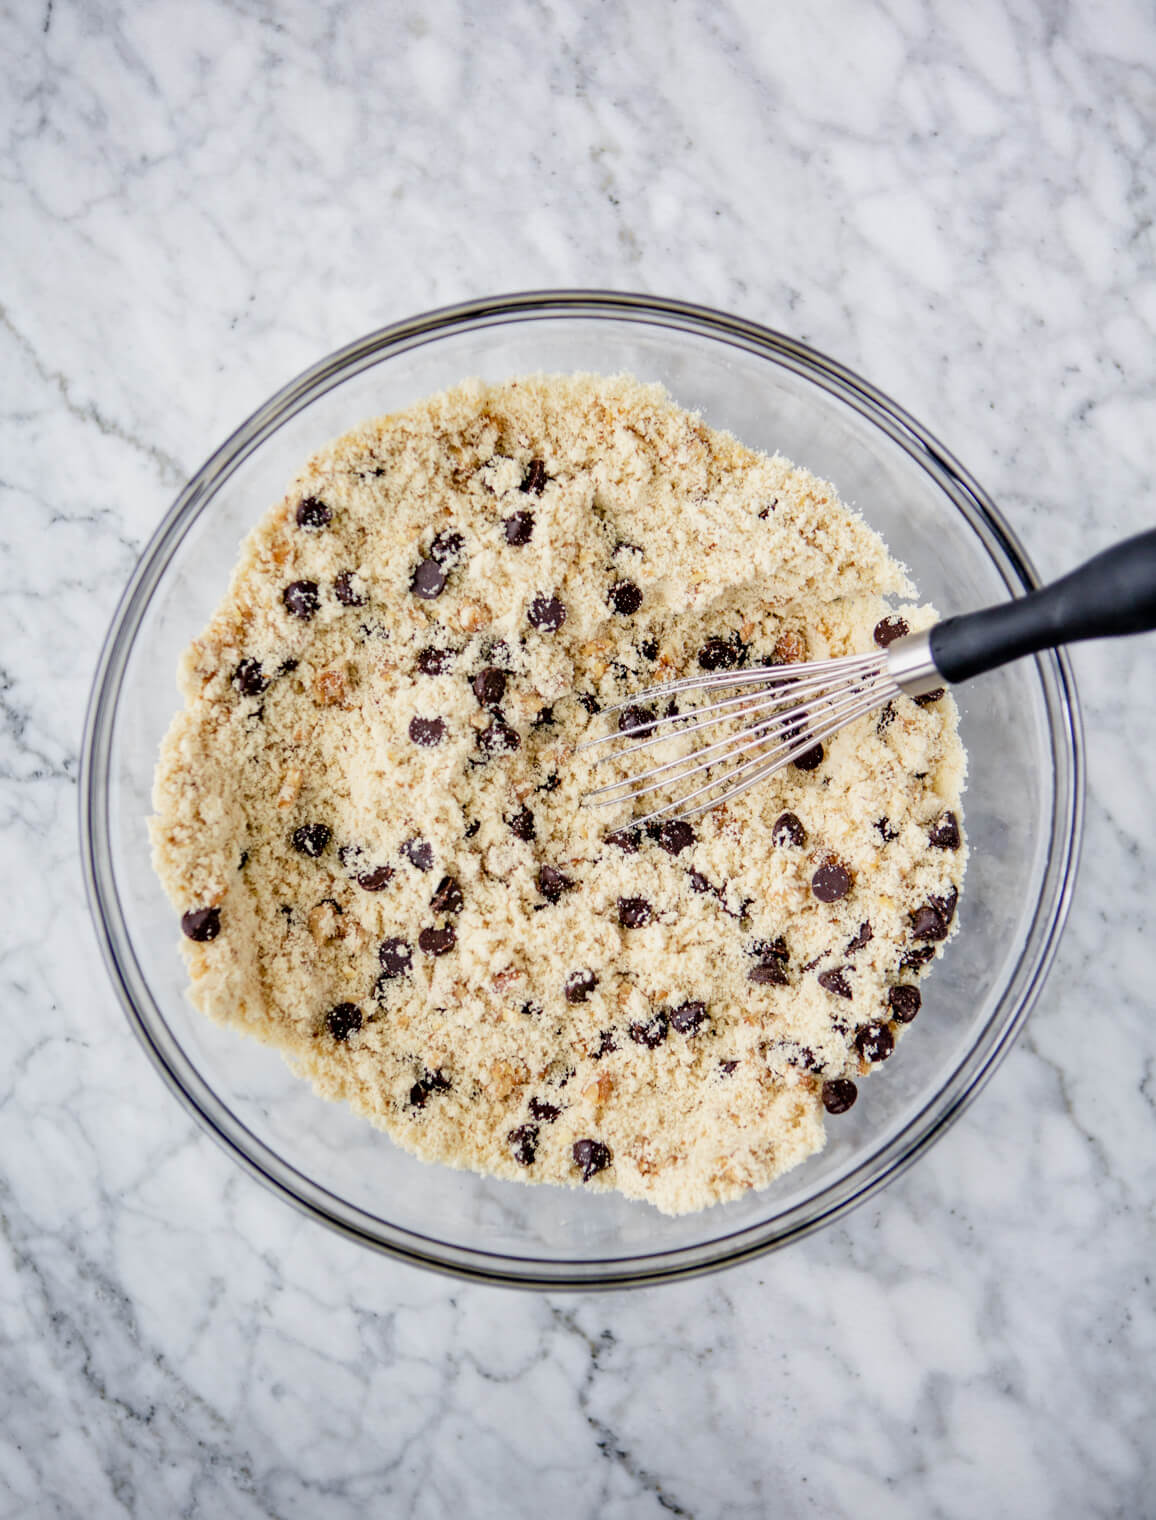 Dry ingredients combined with walnuts and chocolate chips in a bowl with a whisk.